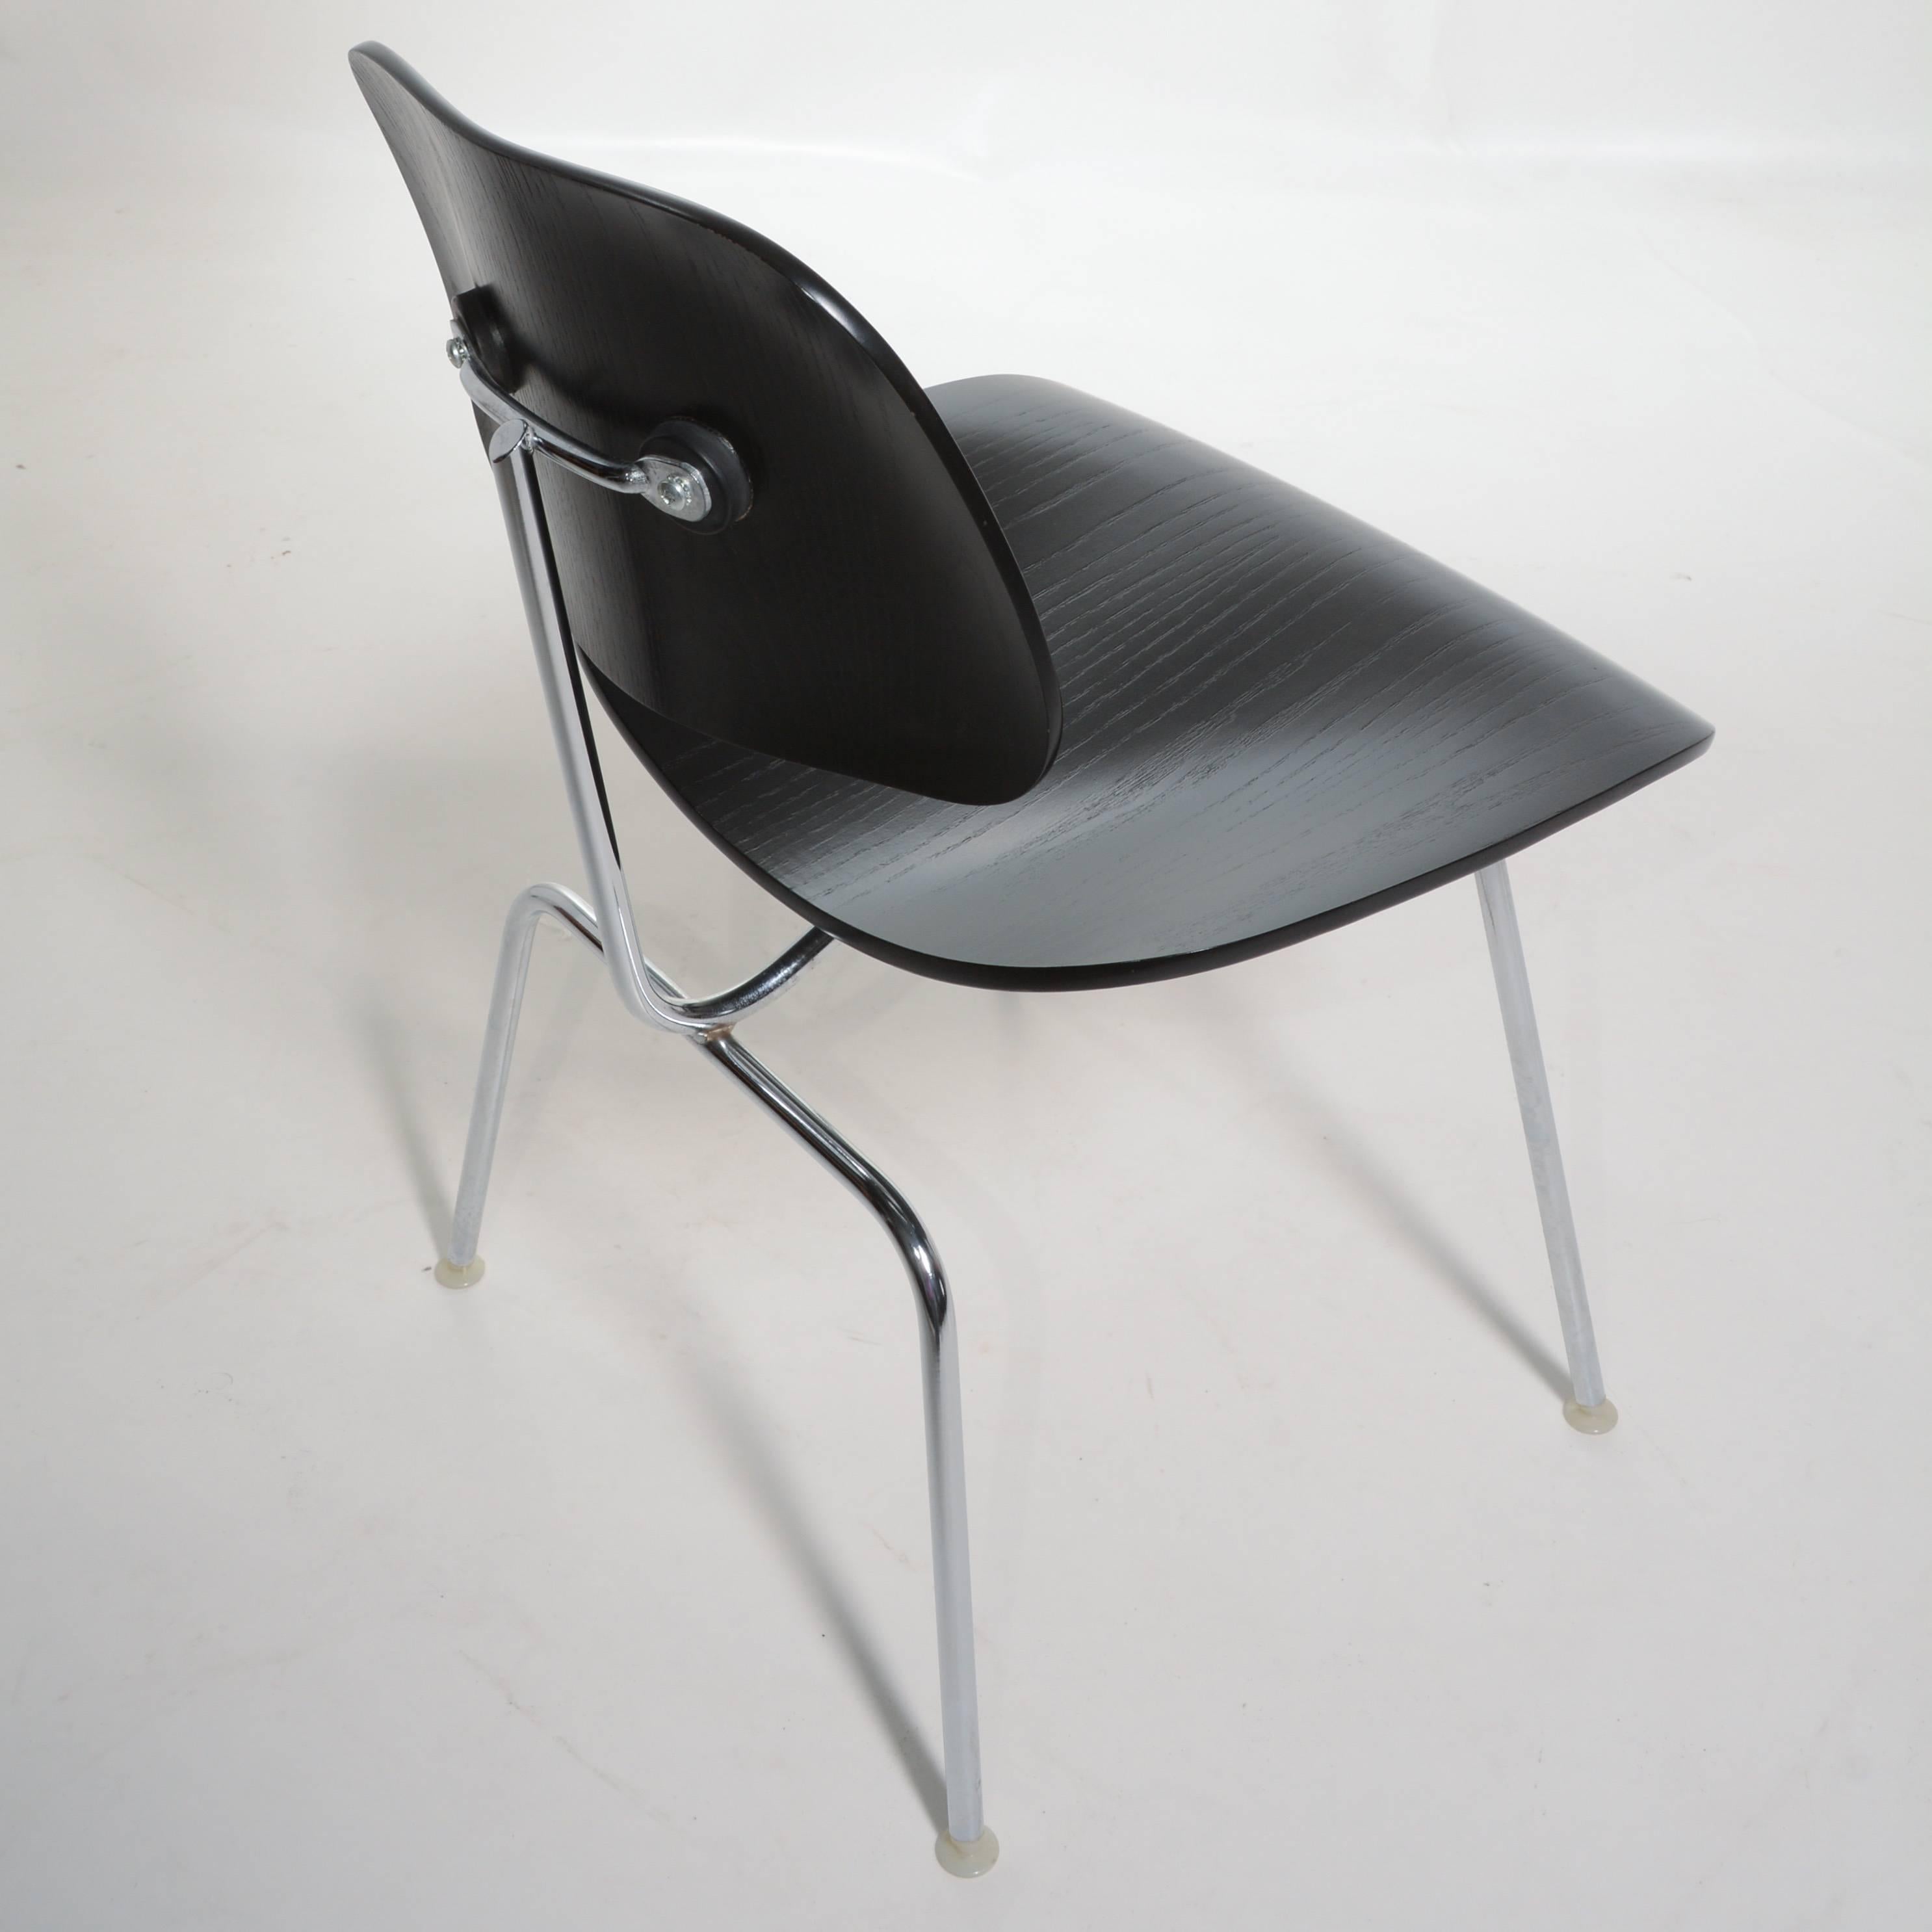 Black Eames DCM Chairs In Excellent Condition For Sale In Los Angeles, CA